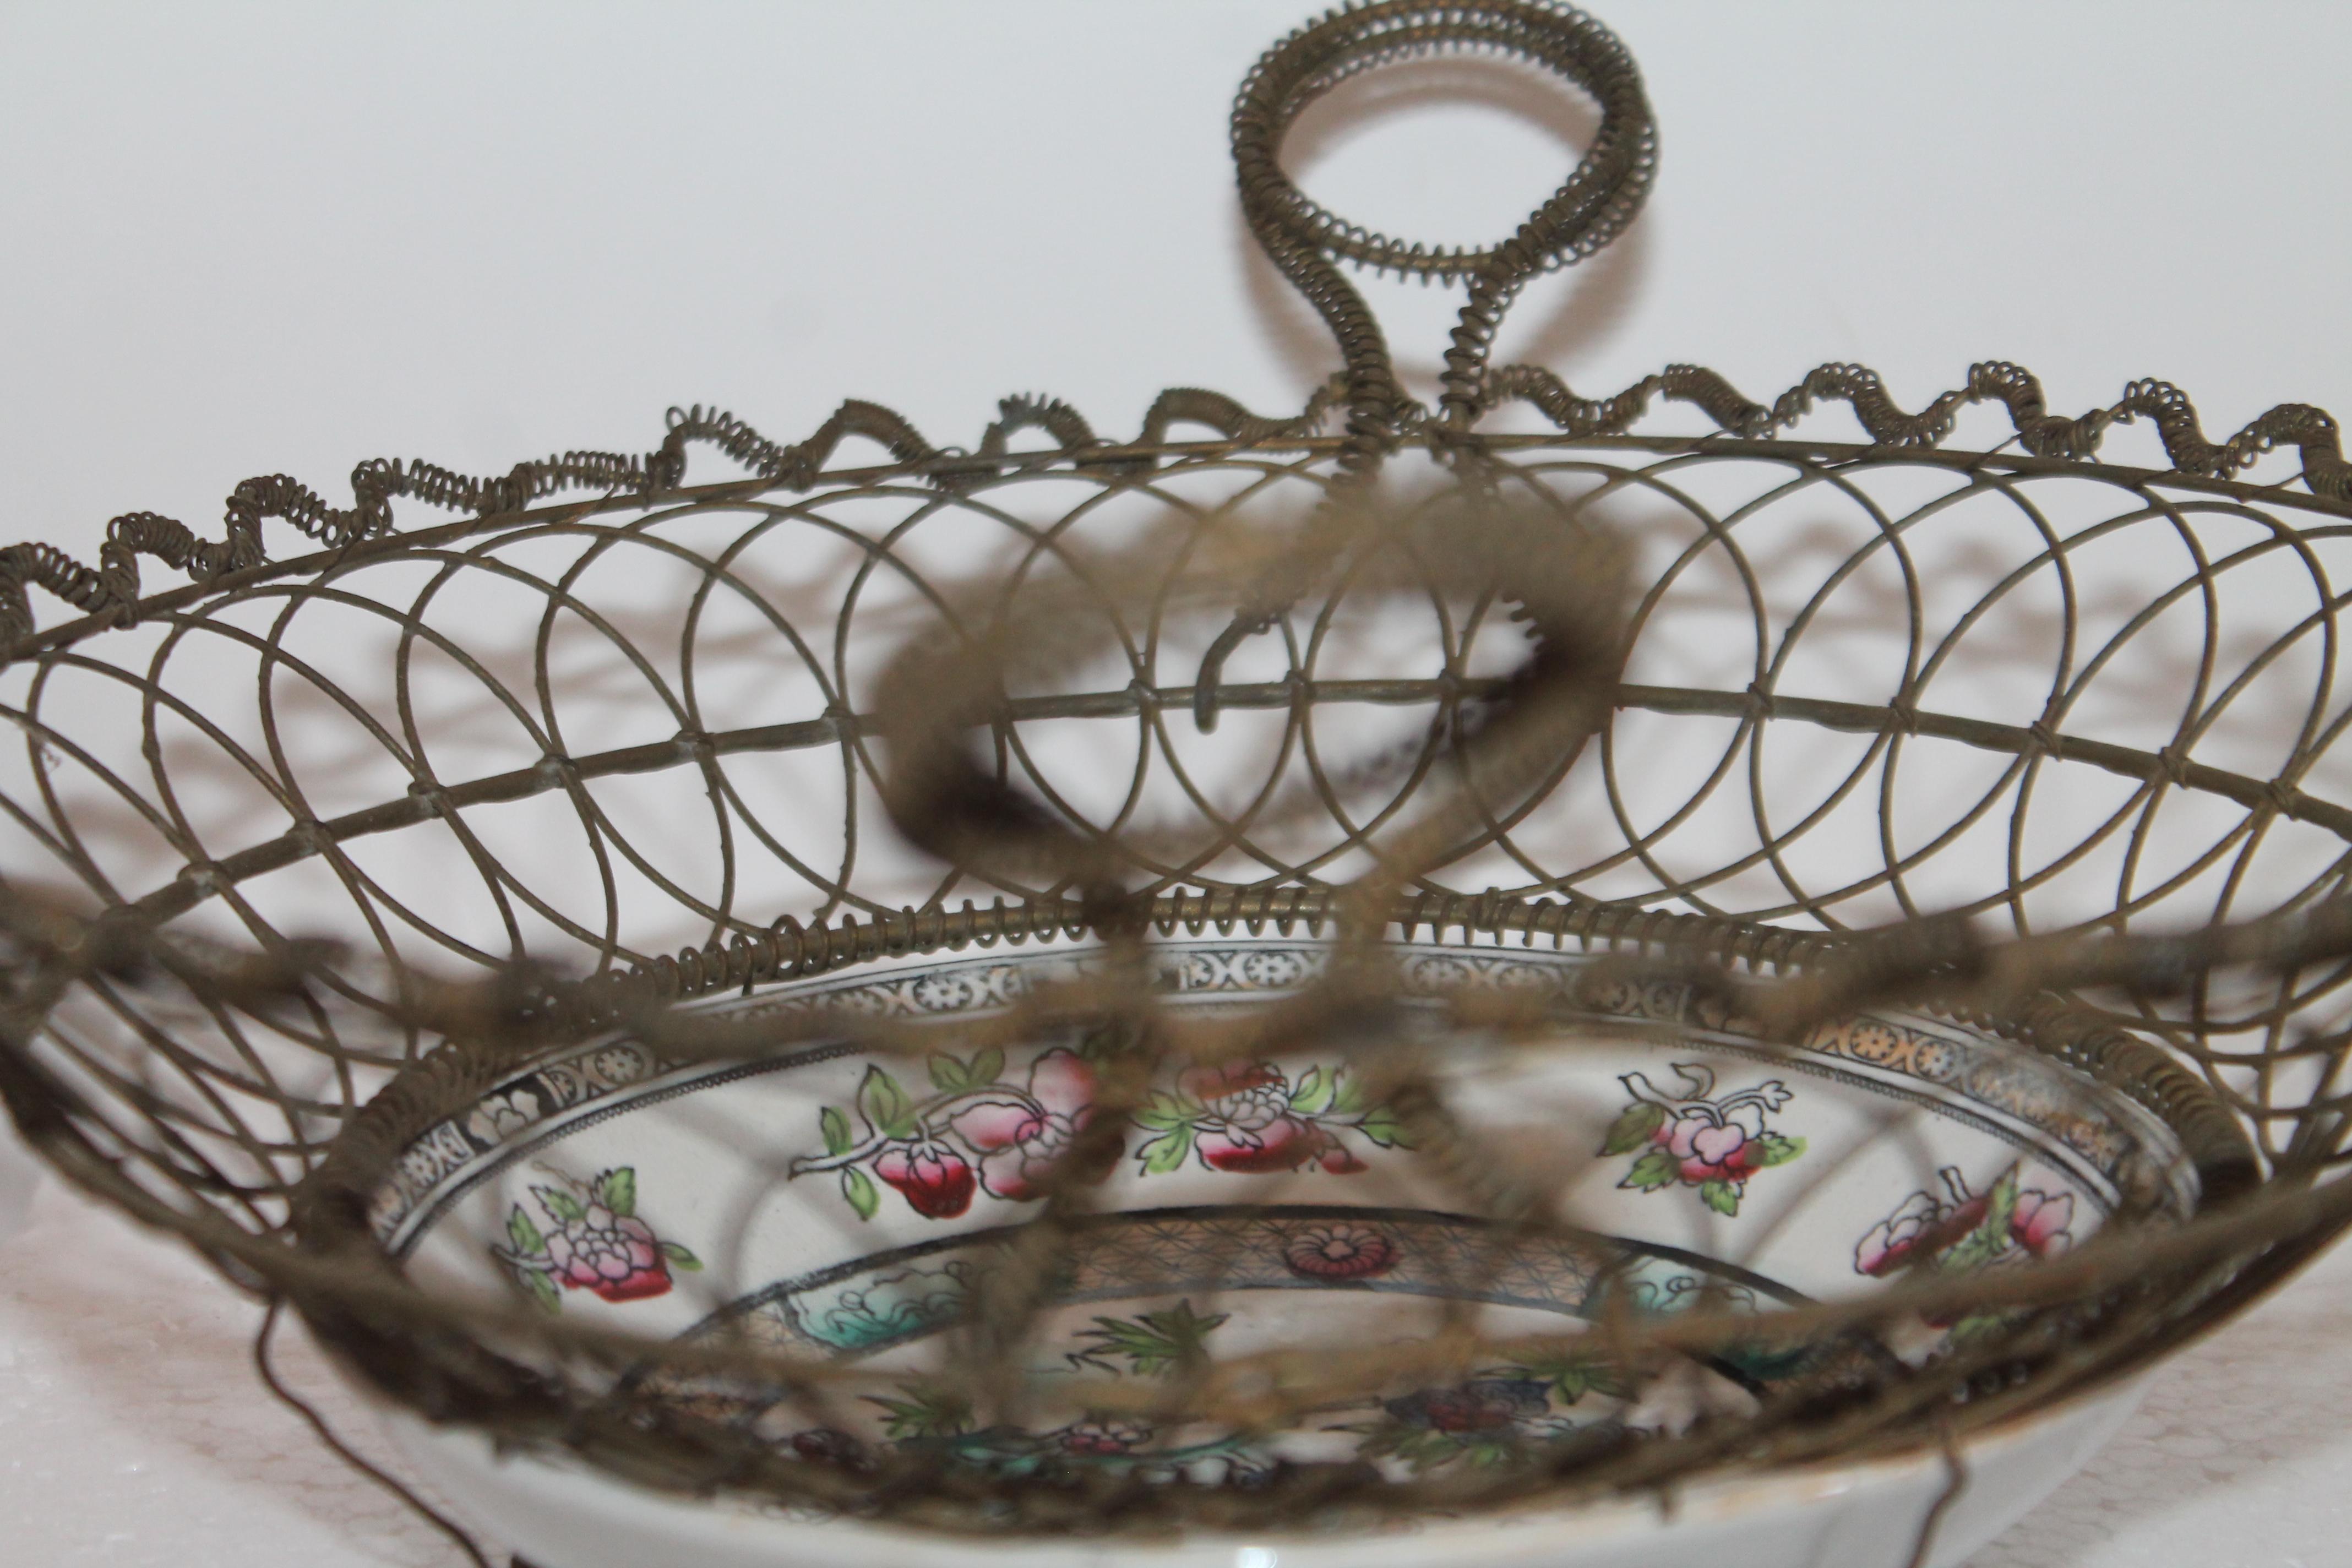 Hand-Crafted 19th Century Handmade Wire Basket from 1870 with a Bowl Inset